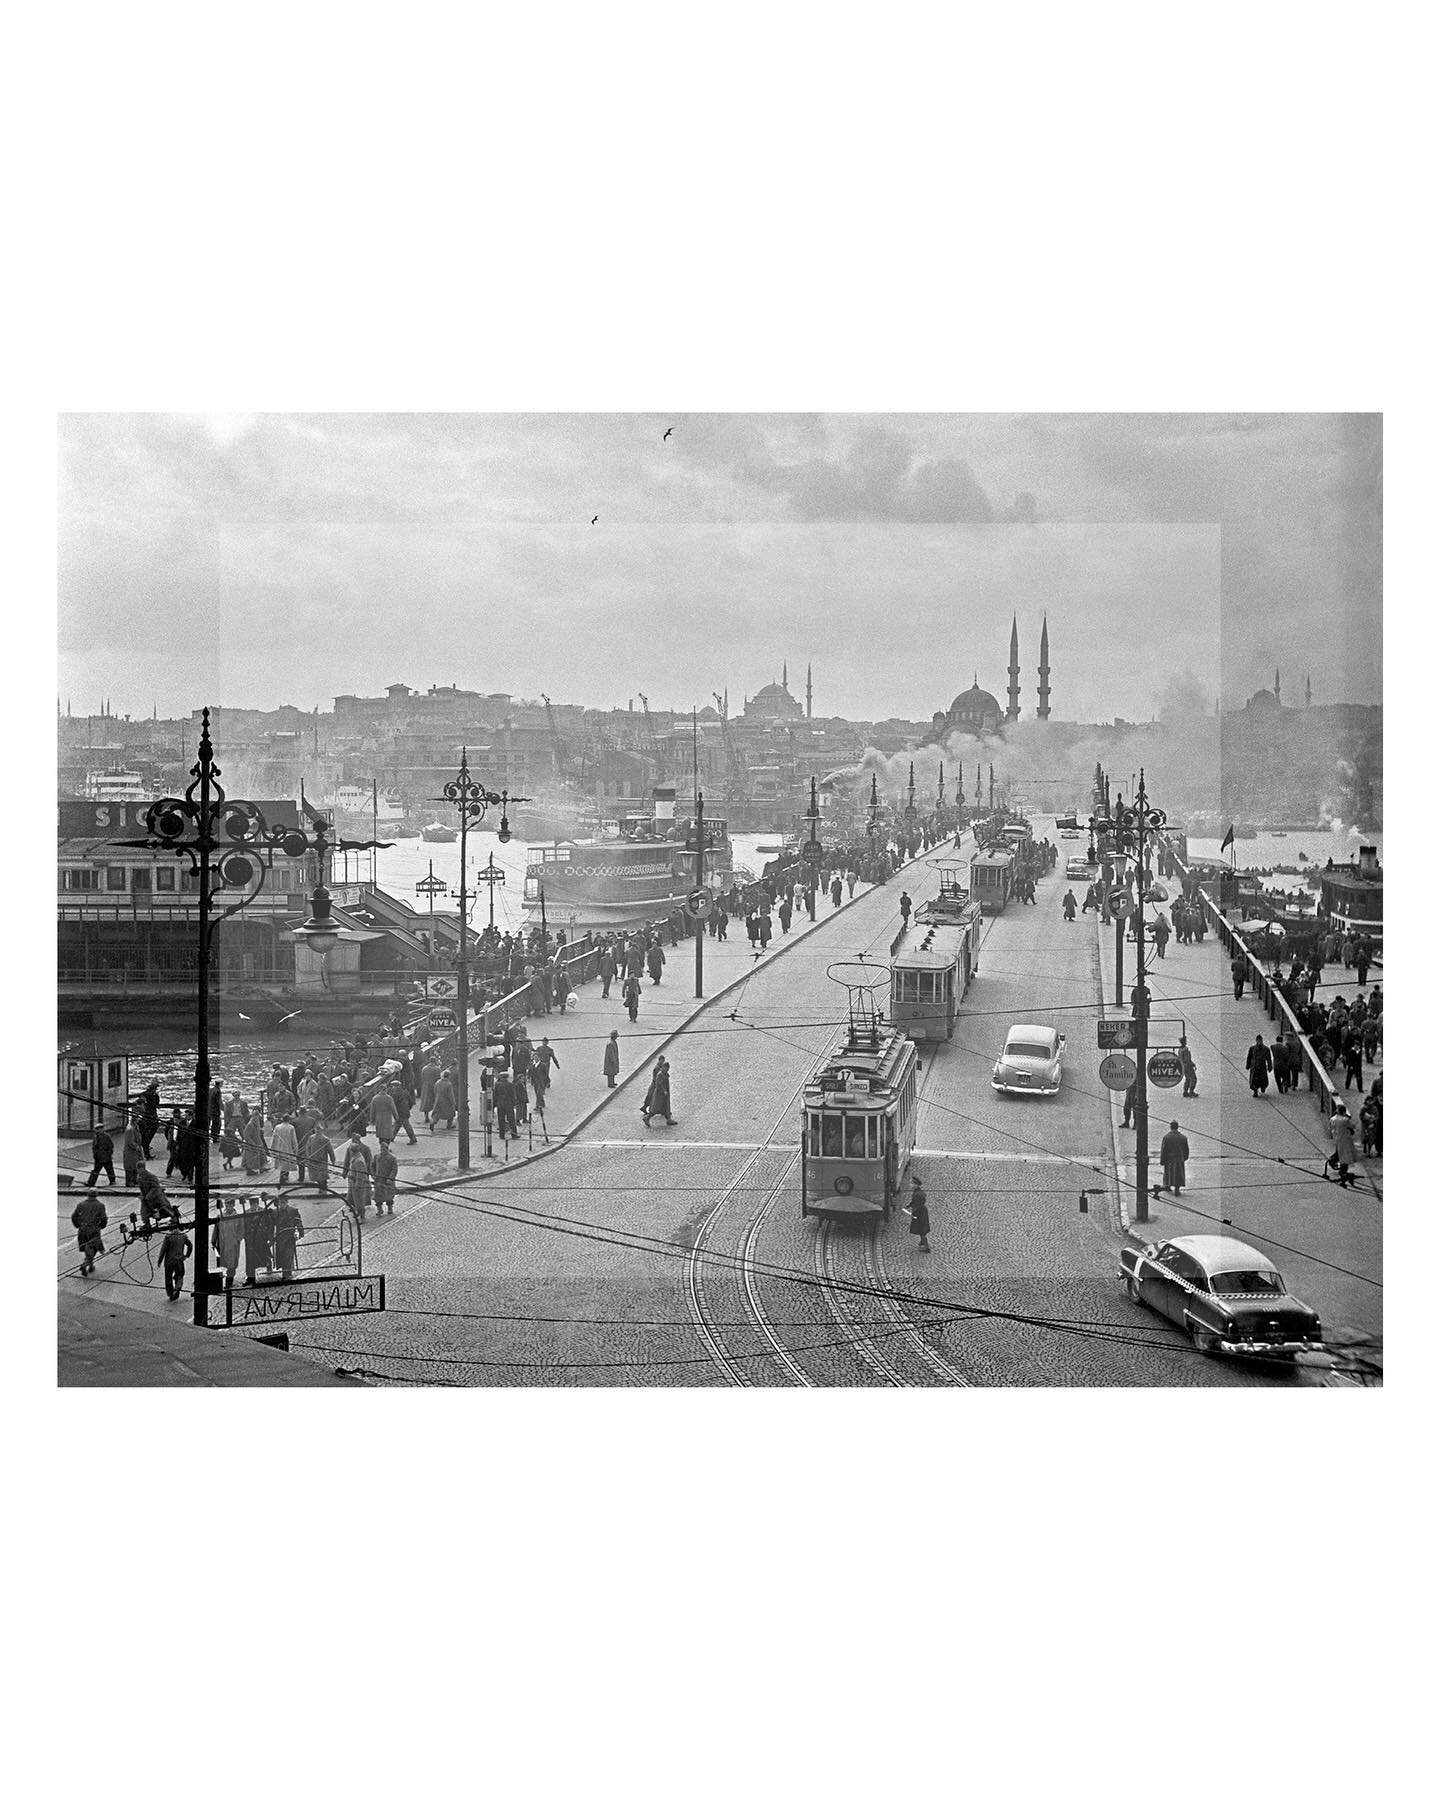 Contextual Reference: Ara Euler, &bdquo;Trams pass in front of the New Mosque in Eminonu, Istanbul&ldquo;, 1958

The spring/summer collection delves into the intriguing interplay between German and Turkish origins. This collection explores the concep